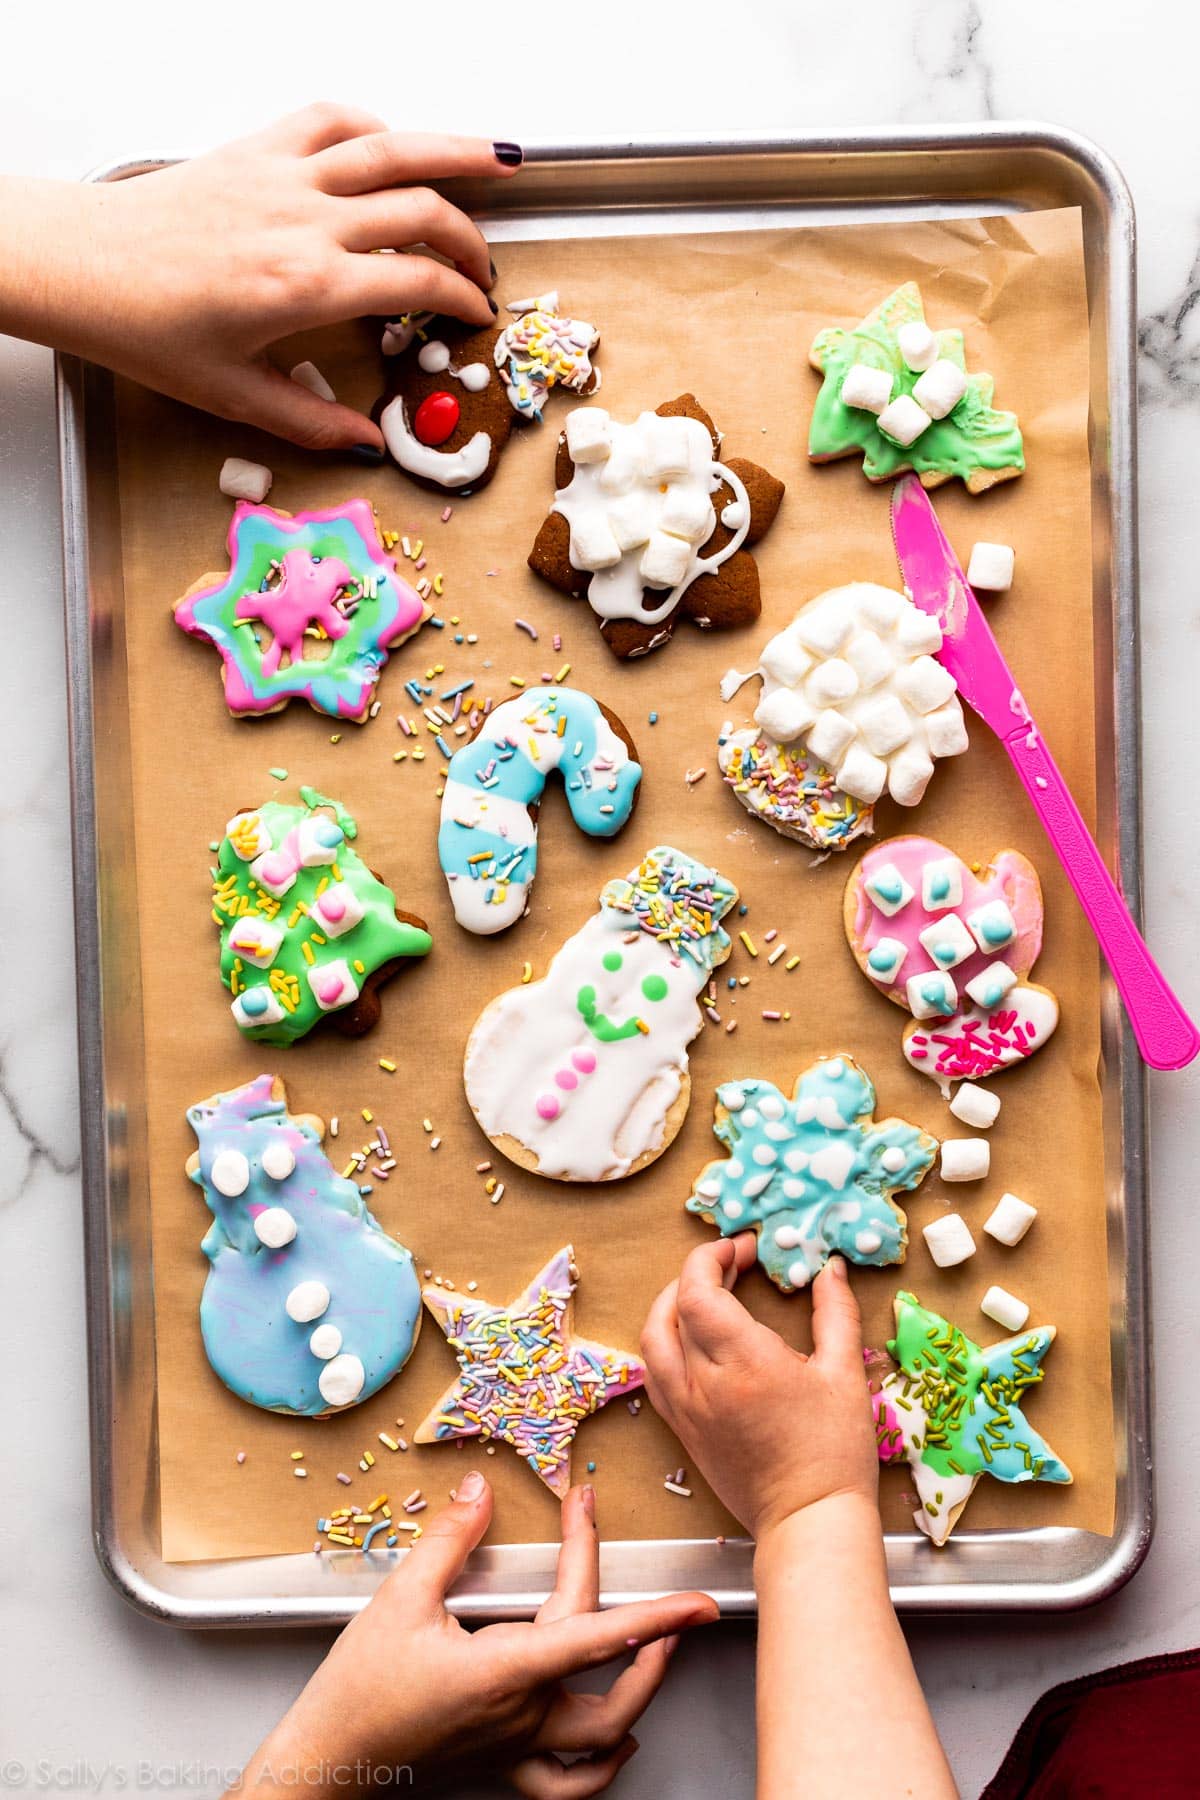 sustantivo título Enjuiciar How to Host a Cookie Decorating Day (& Free Printable) - Sally's Baking  Addiction